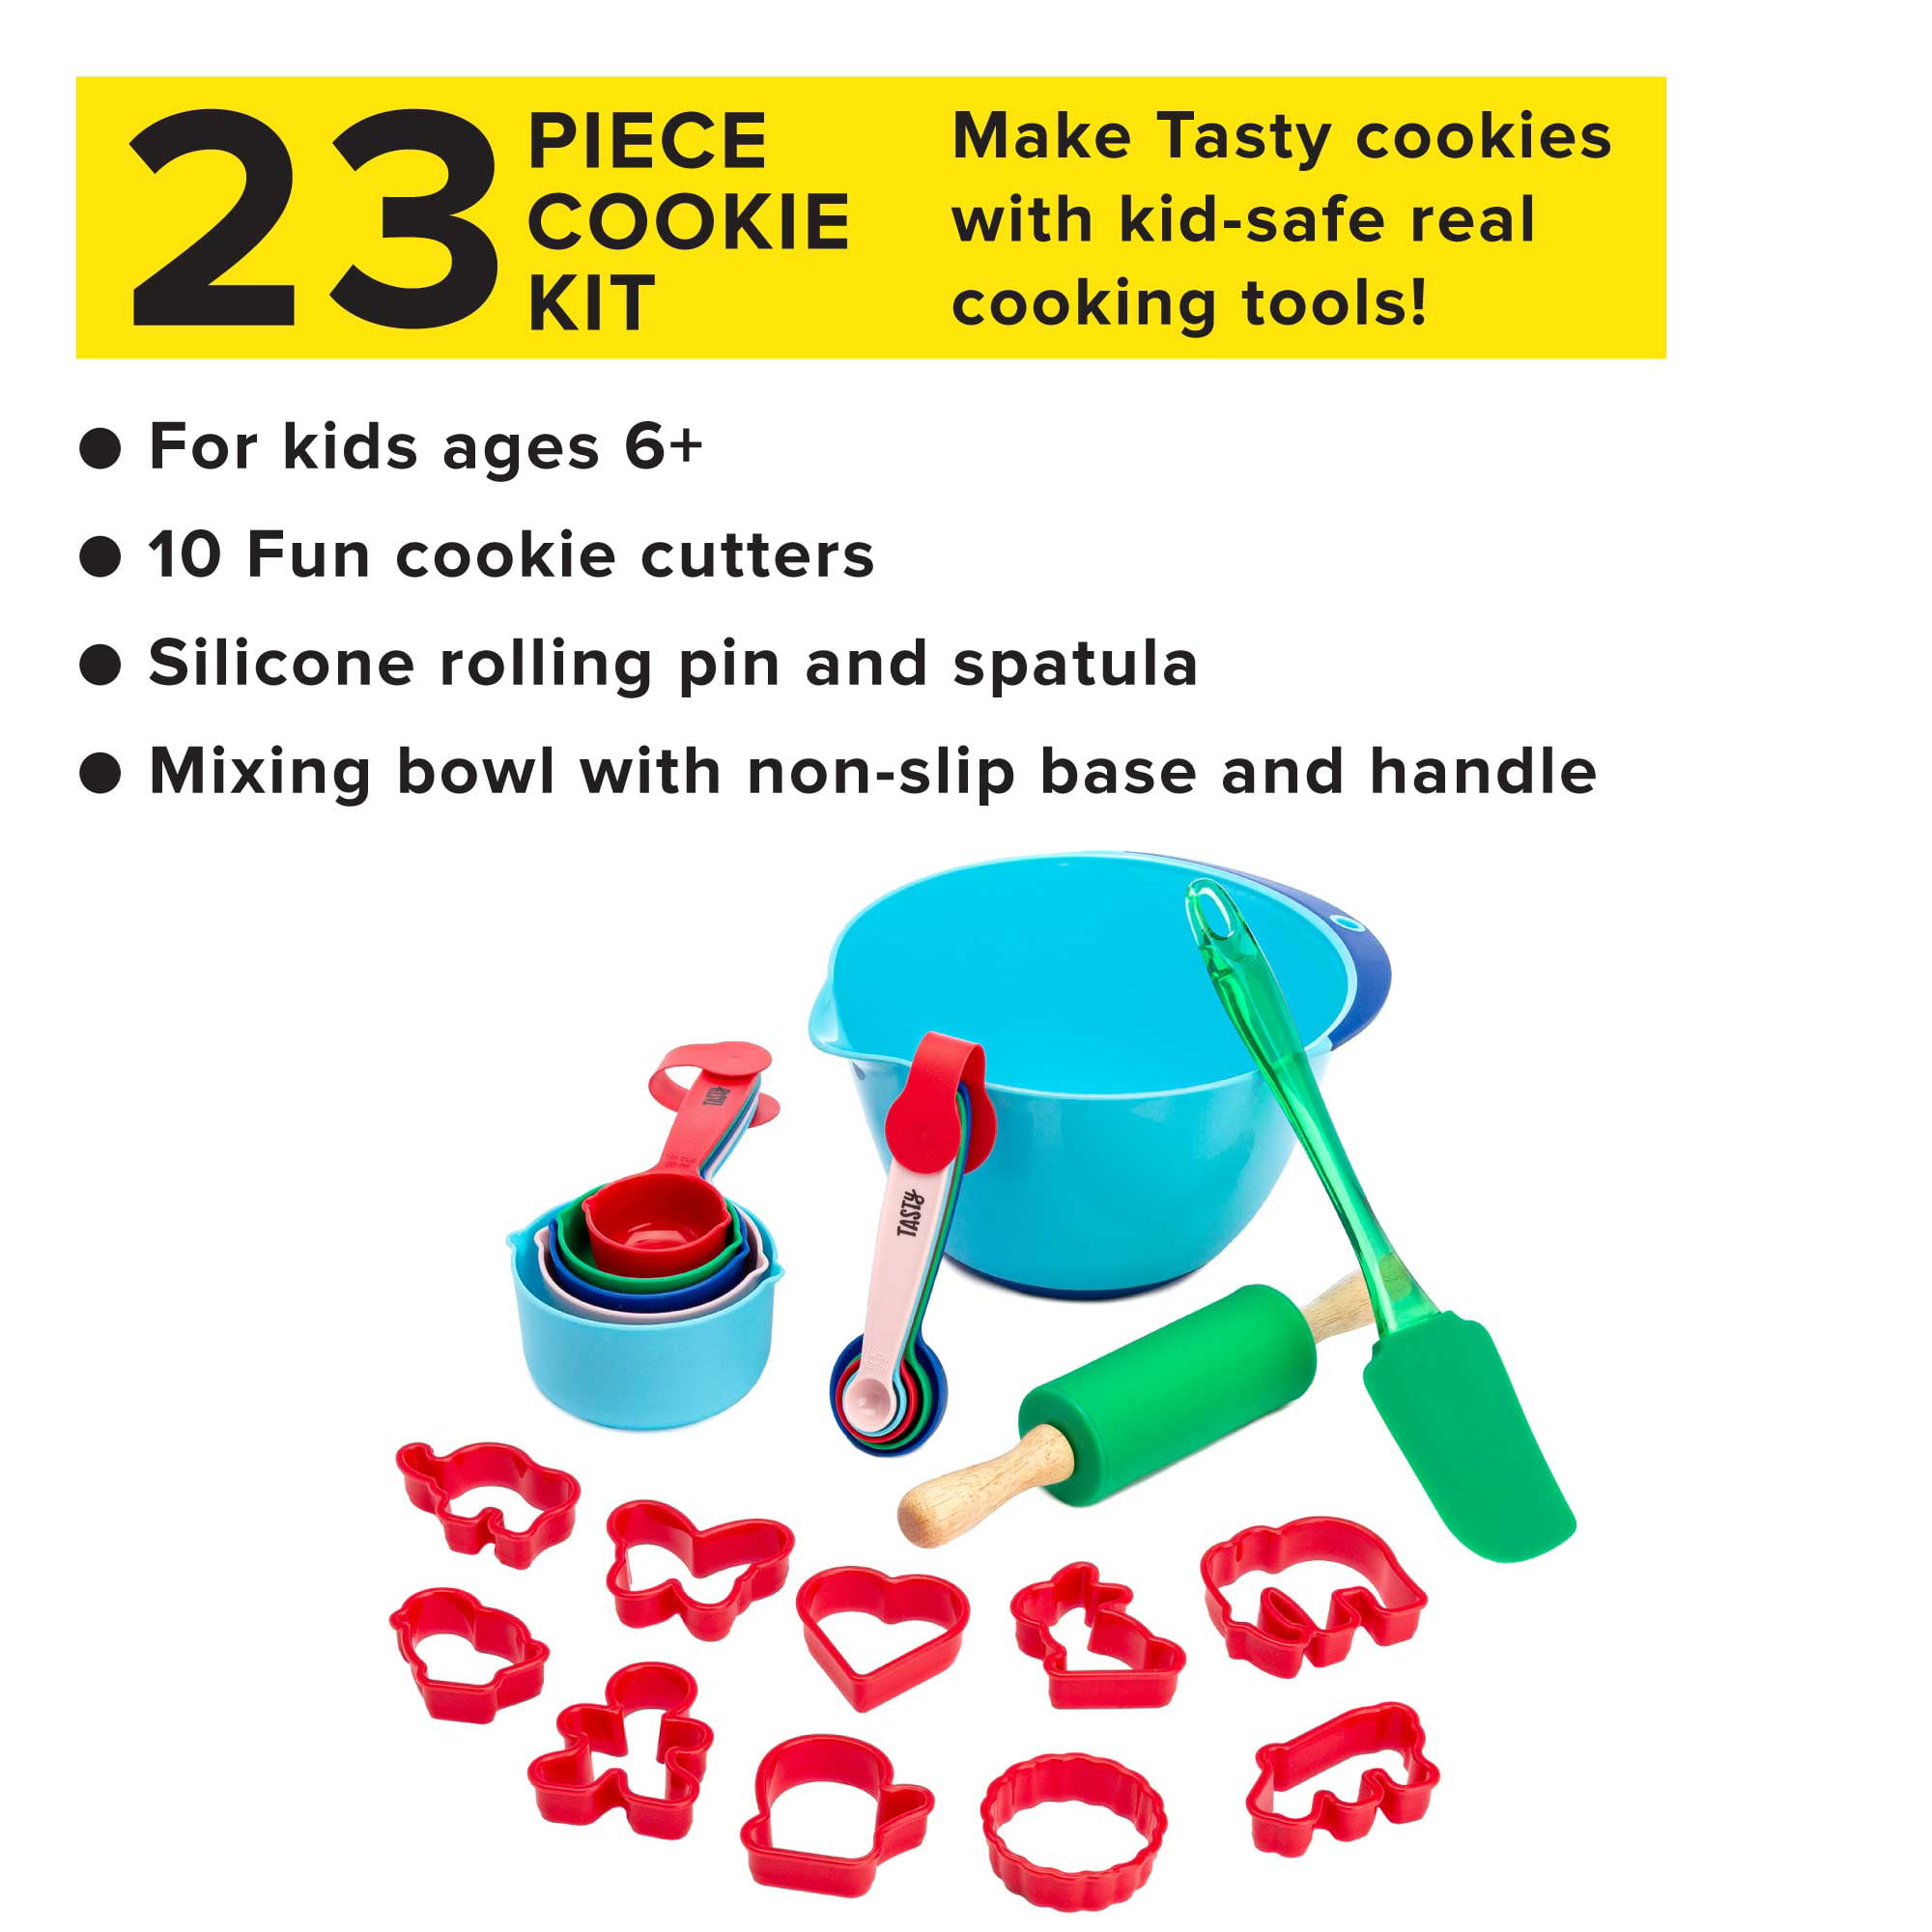 BRAND NEW - Tasty Kits Cookie Baking Gadget Set - Real Kid-Safe Baking  Tools/Multi-color - 23 Piece for Sale in Deerfield Beach, FL - OfferUp